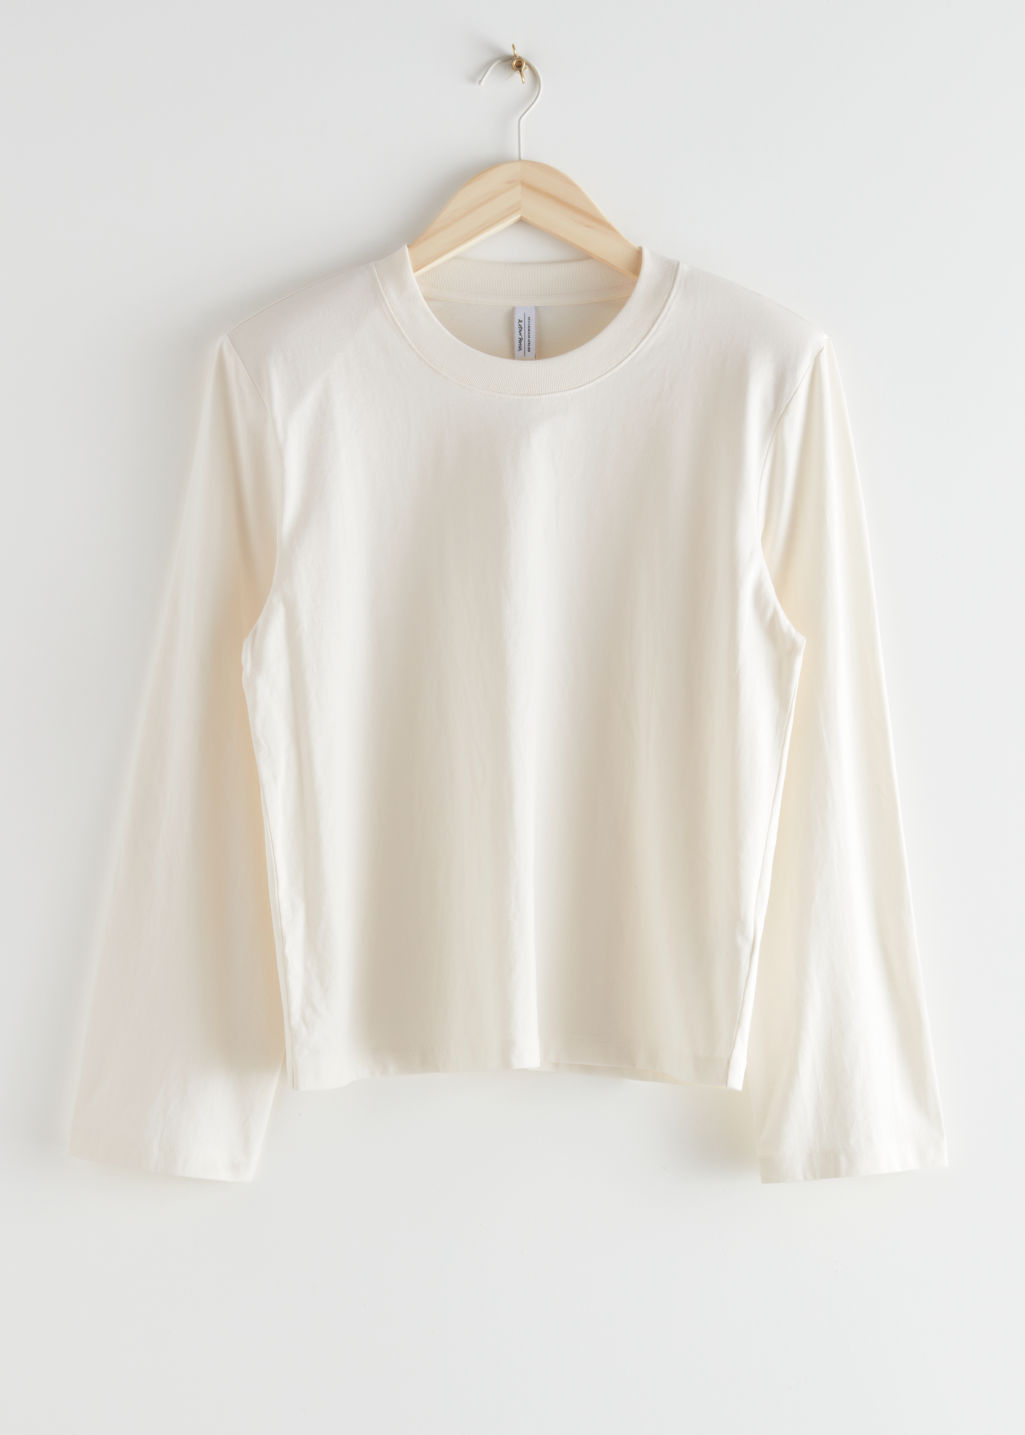 Relaxed Padded Shoulder Top - Creme - Tops & T-shirts - & Other Stories